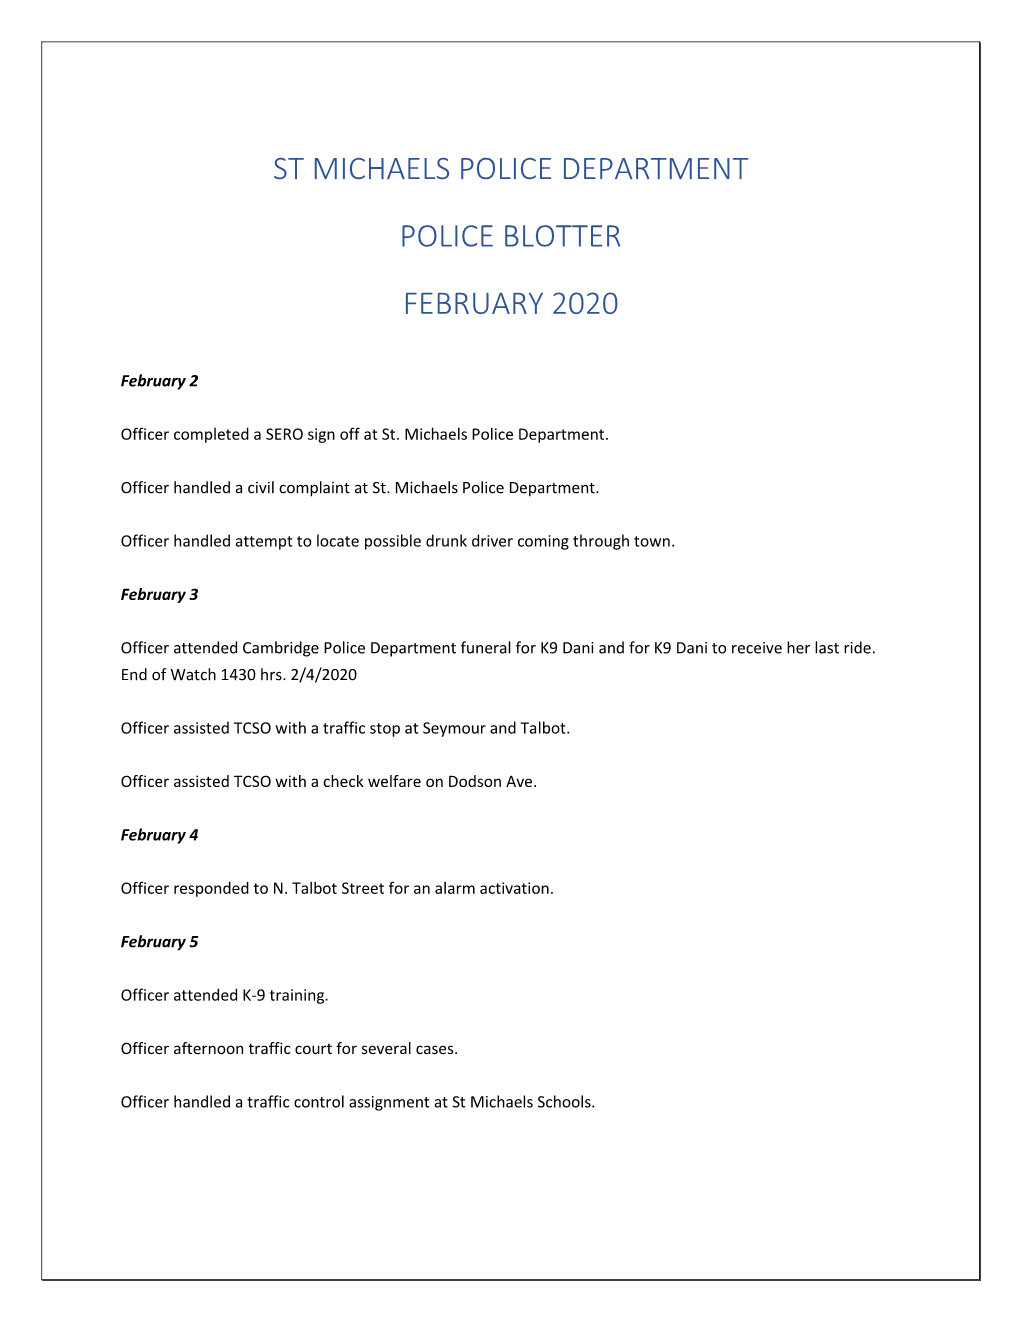 St Michaels Police Department Police Blotter